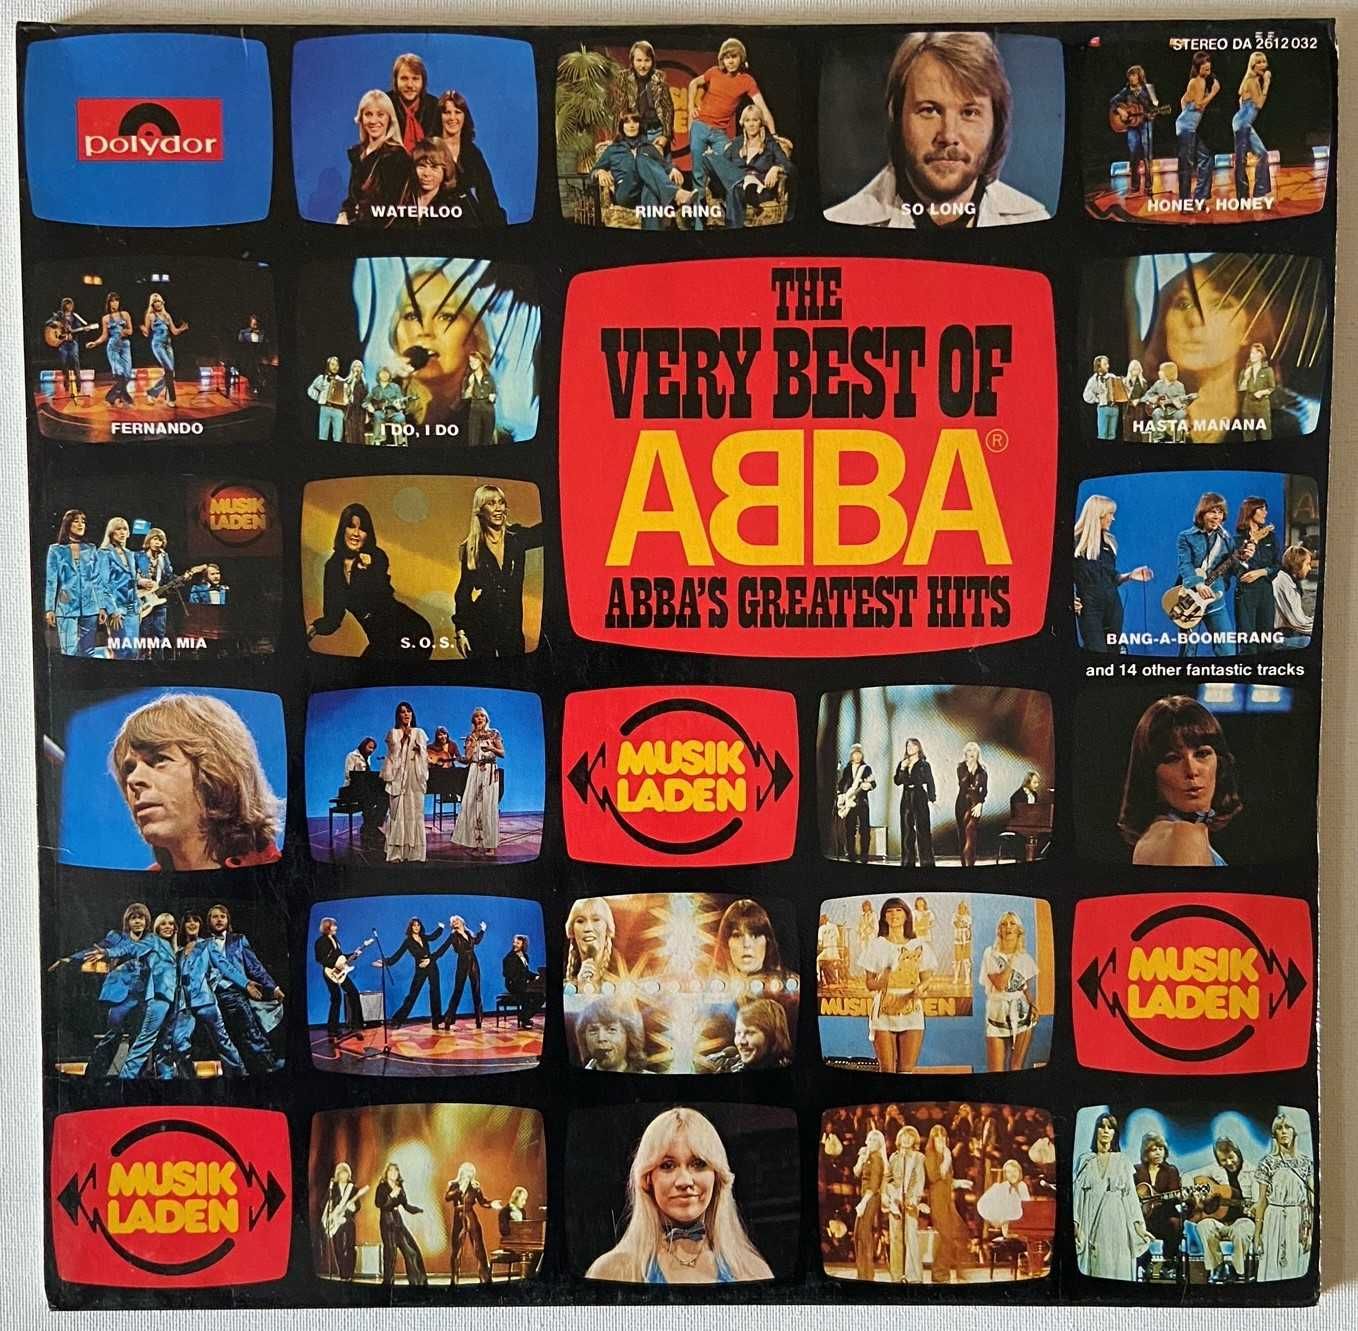 ABBA – The Very Best Of ABBA (ABBA's Greatest Hits) 2xLP